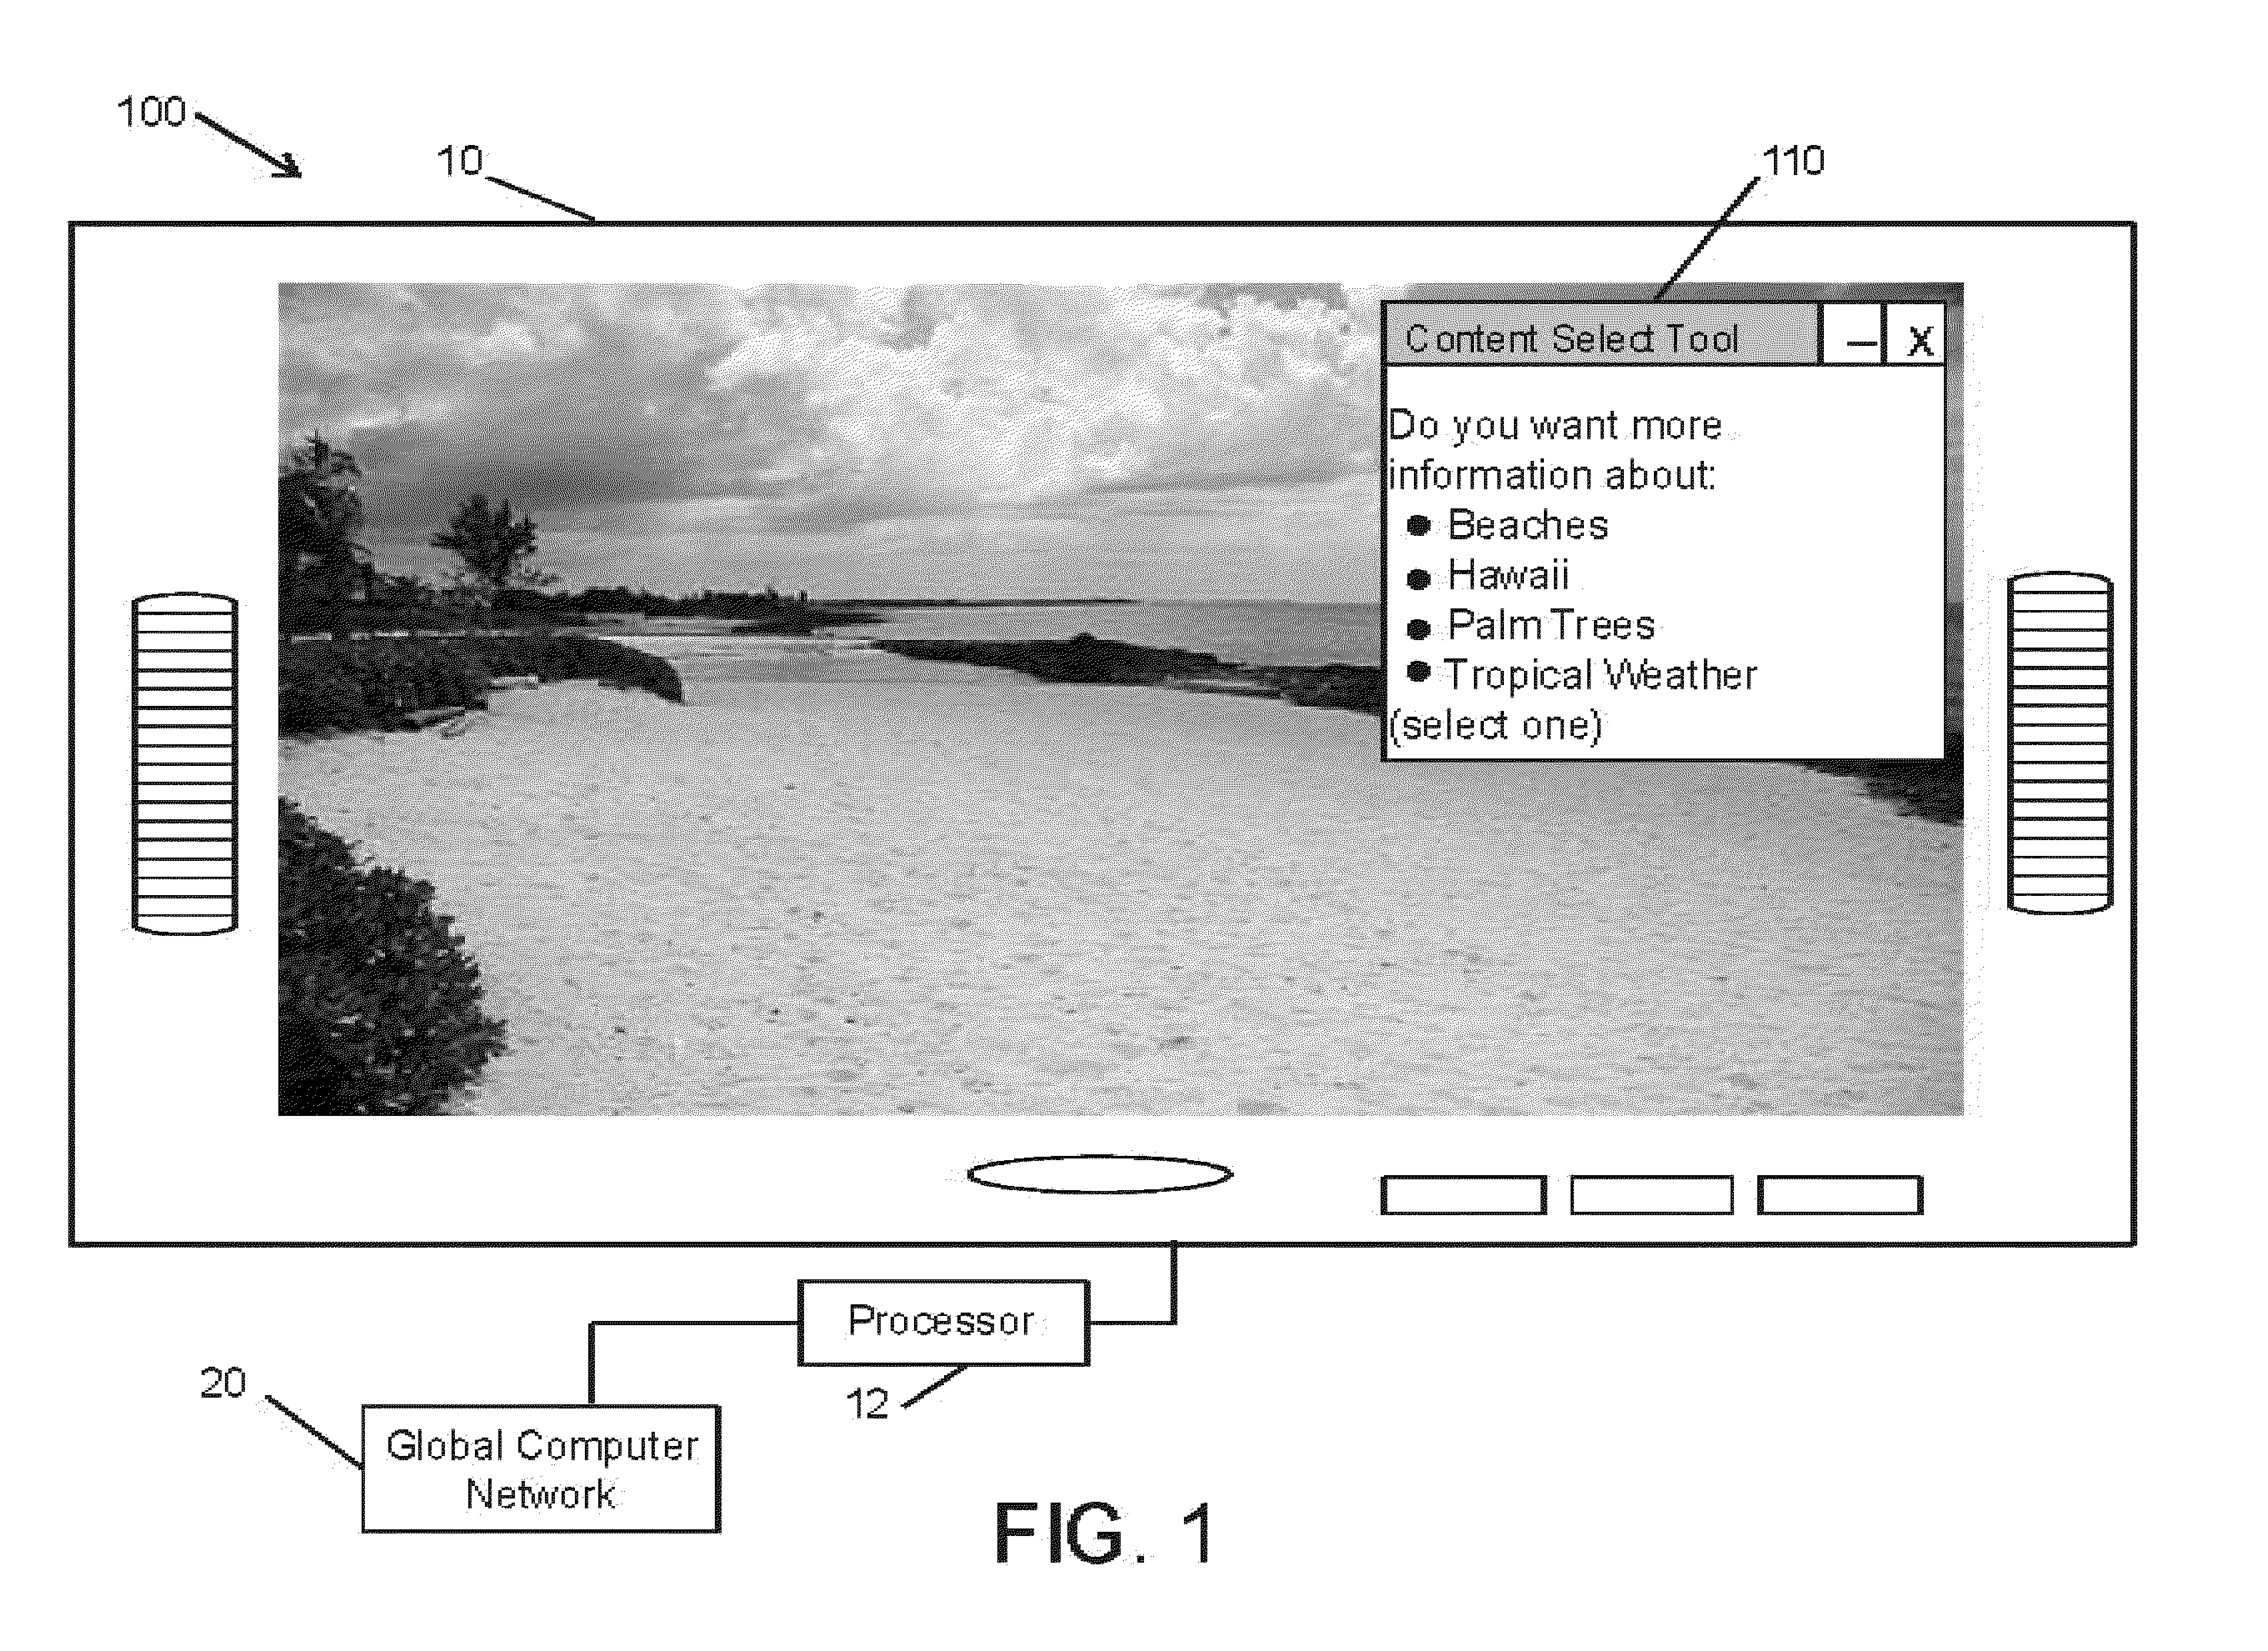 Methods for identifying video segments and displaying contextually targeted content on a connected television